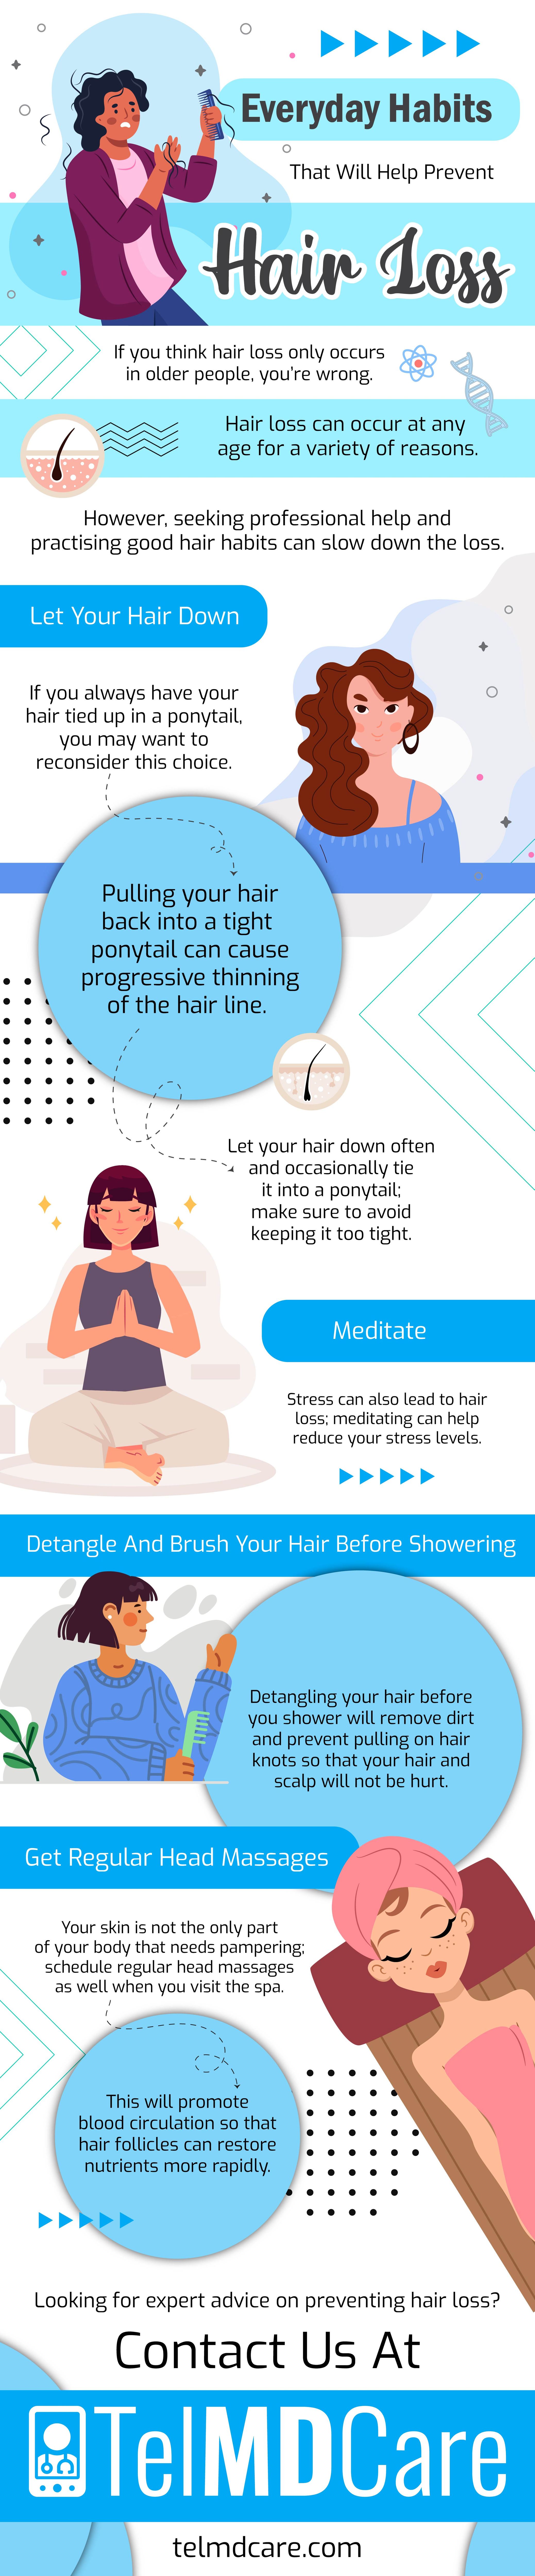 Everyday Habits That Will Help Prevent Hair Loss